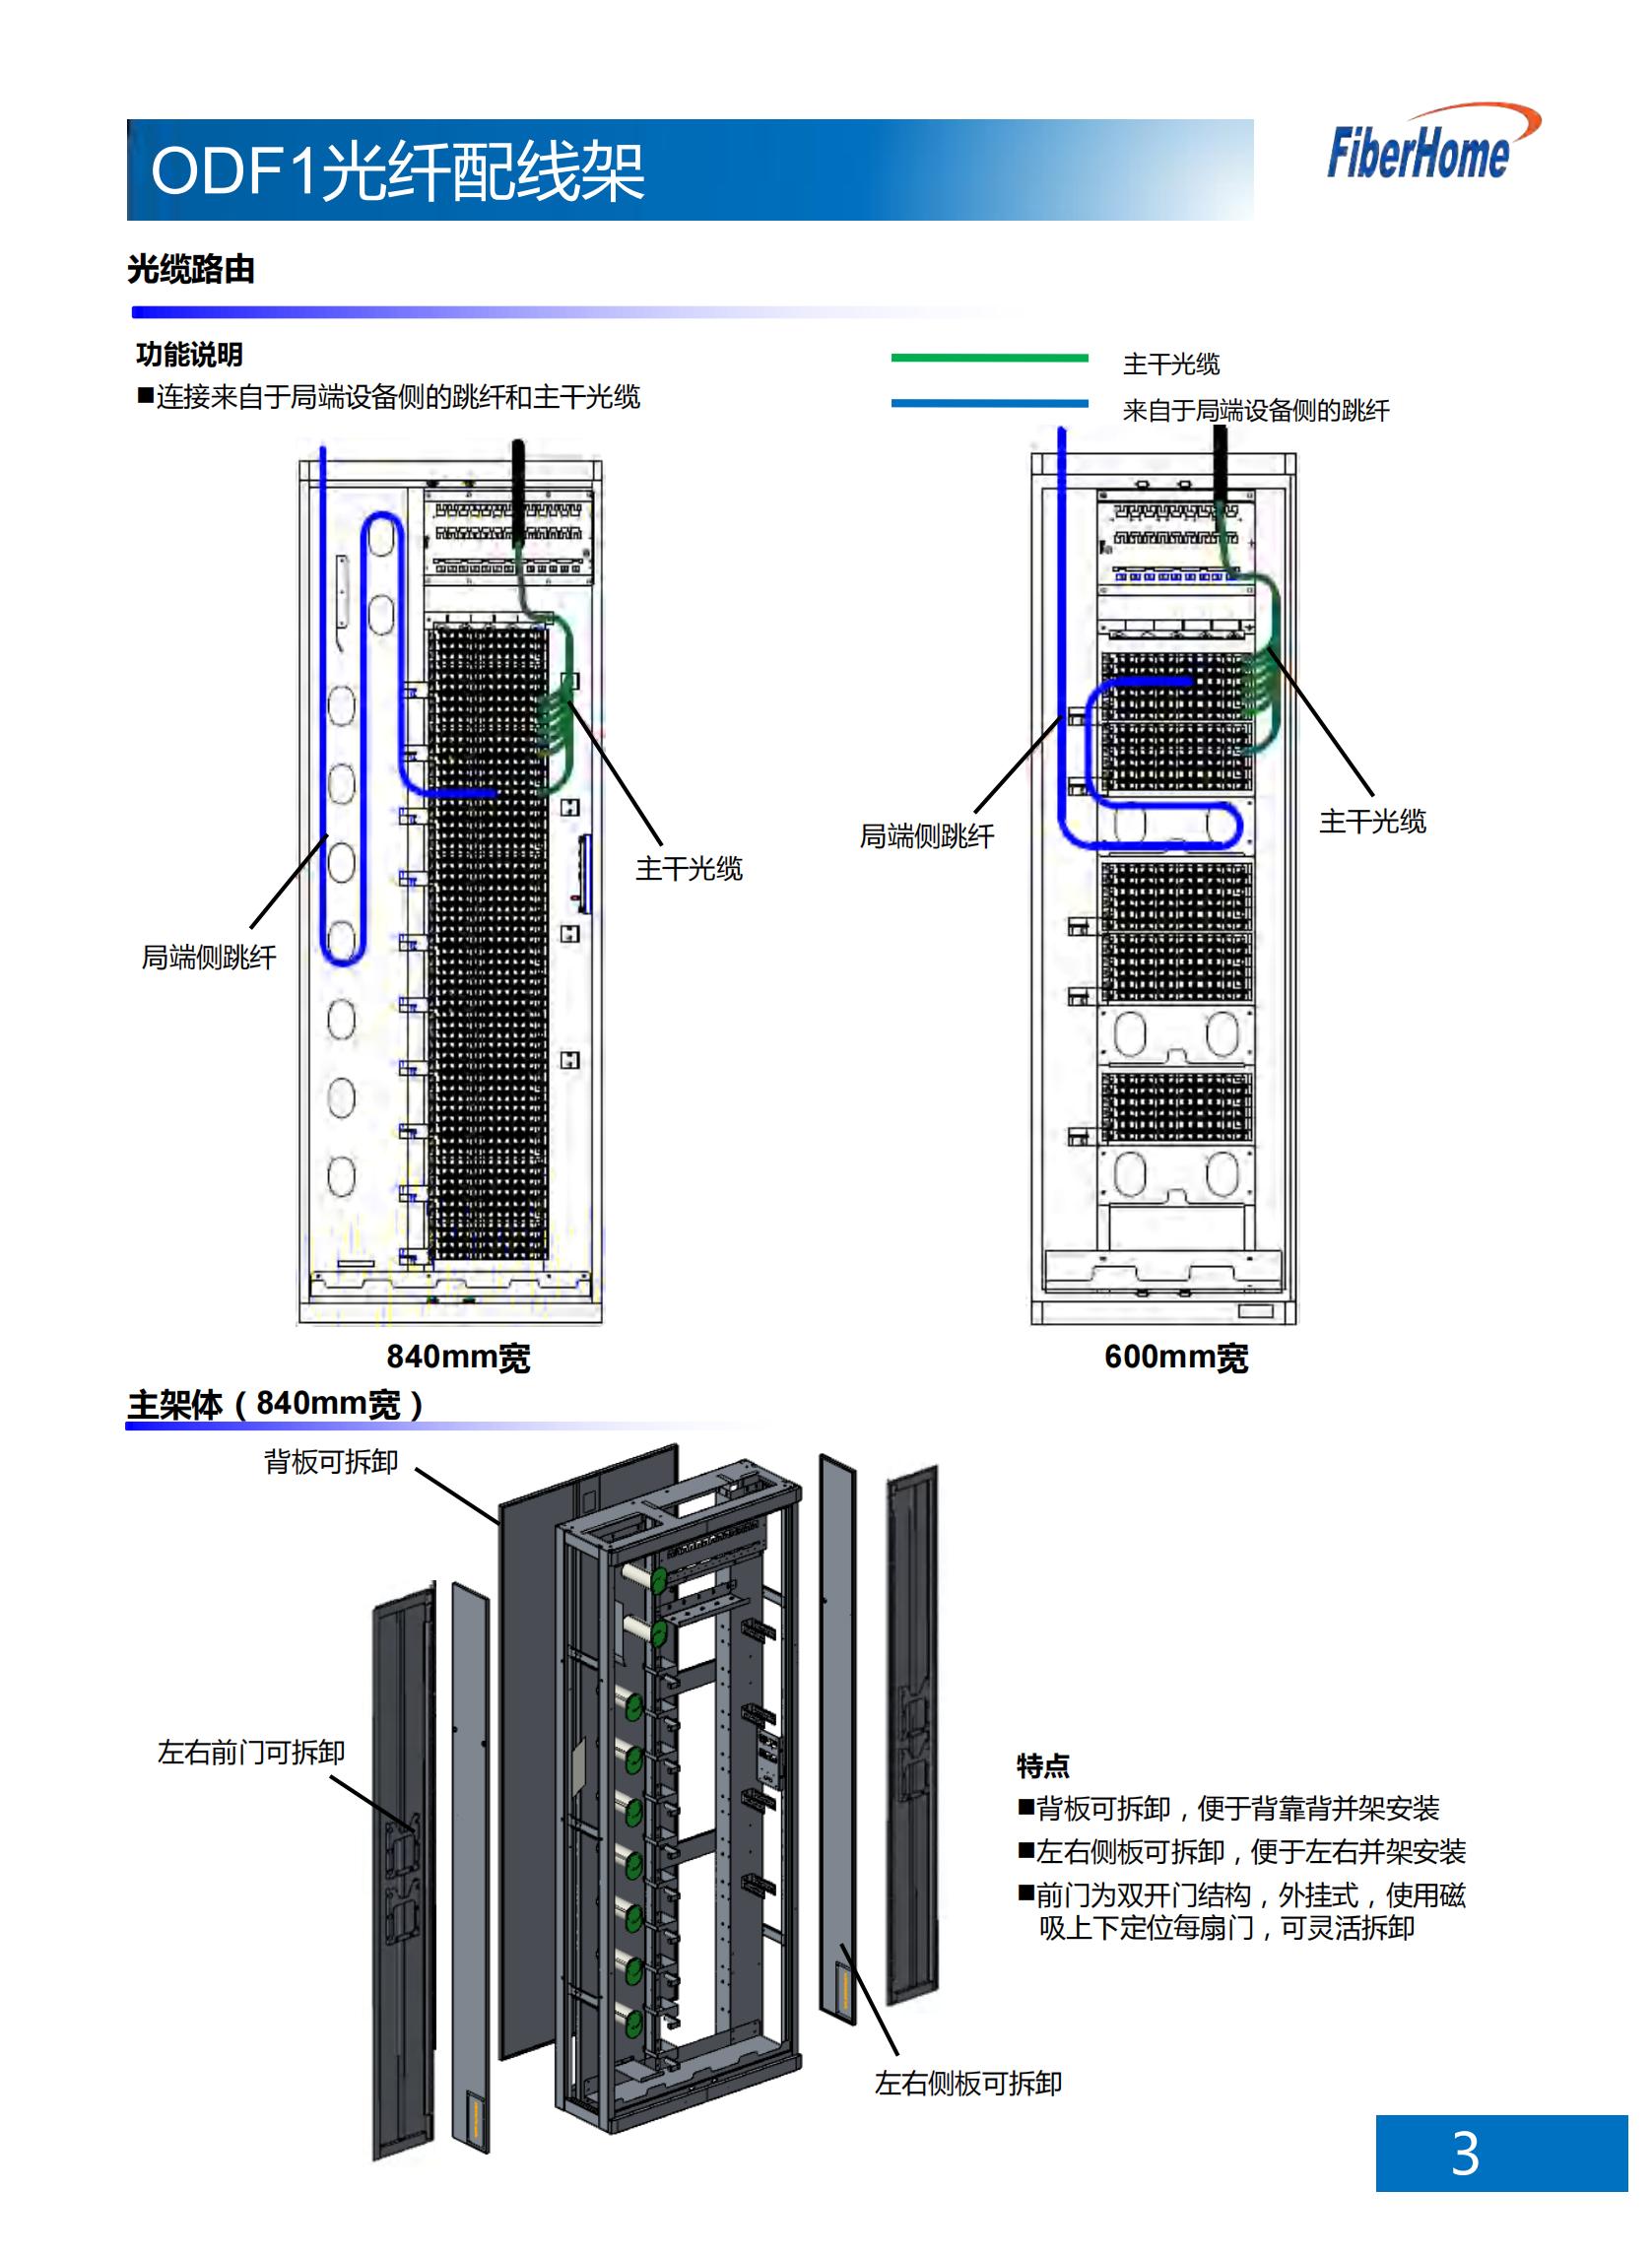 ODF101-1152-A4-LC ODF optical fiber distribution frame (576-core floor-standing all include 24-core LC fusion integrated unit) with fiber storage unit)